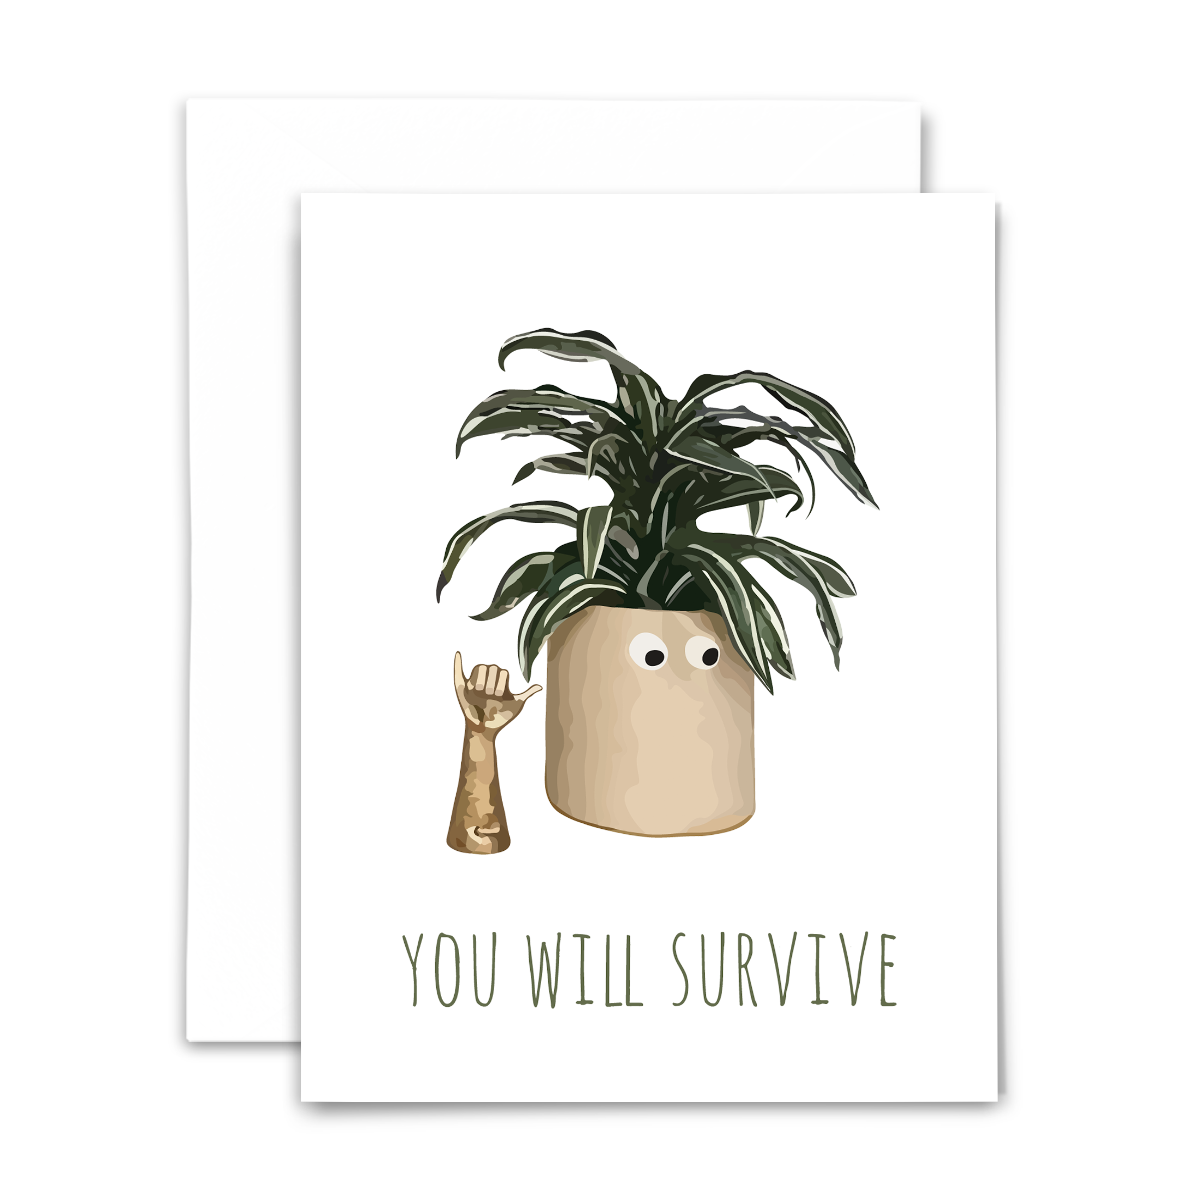 "You will survive" blank greeting card from "Planty Puns" collection, featuring Dracaena warneckii on white background with green lettering; with white envelope